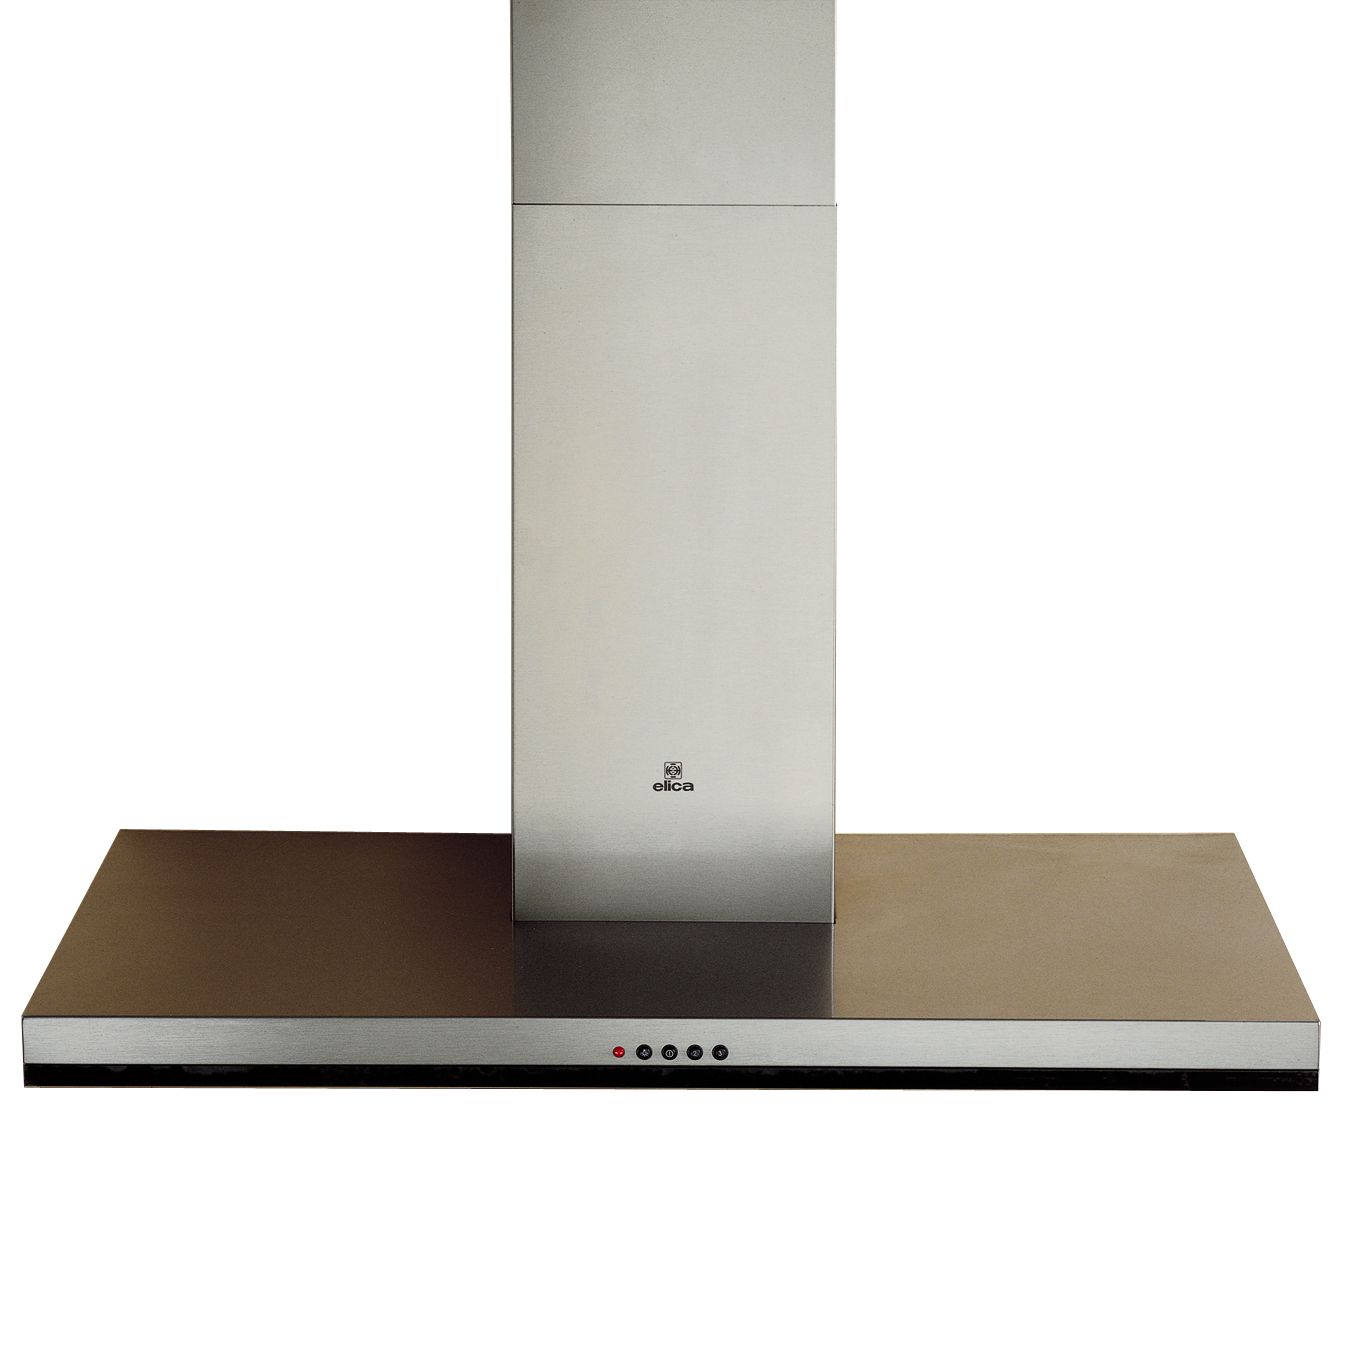 Elica Concept Cube 60 Chimney Cooker Hood, Stainless Steel at John Lewis